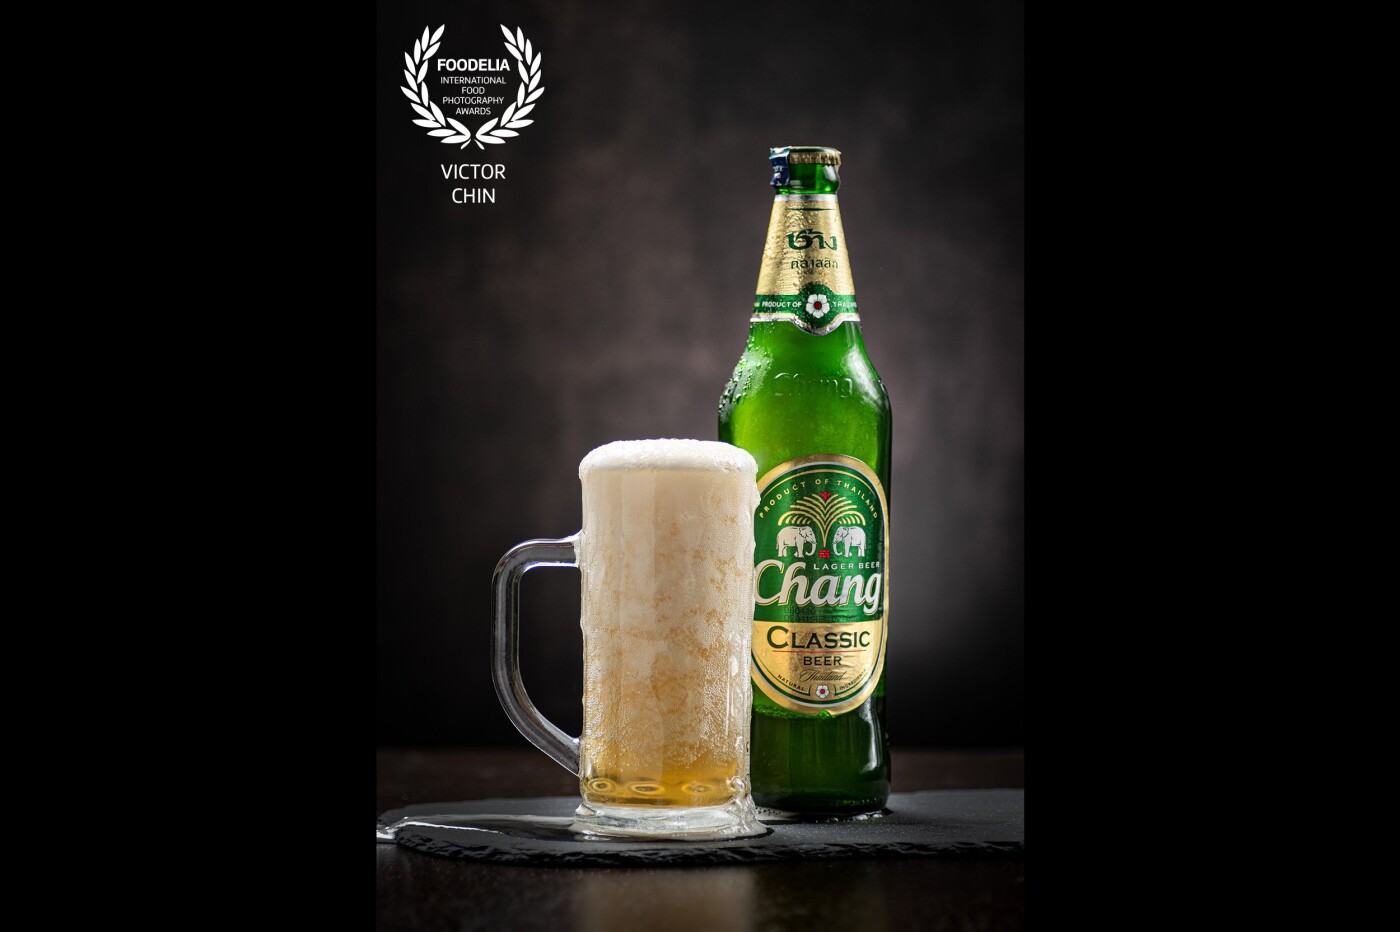 Snow Beer!<br />
<br />
The beer is chilled in a special refrigerator. The idea is to maintain its temperature at a designated degree so that the beer freezes during pour out of the bottle and give it an ice-blended texture. 